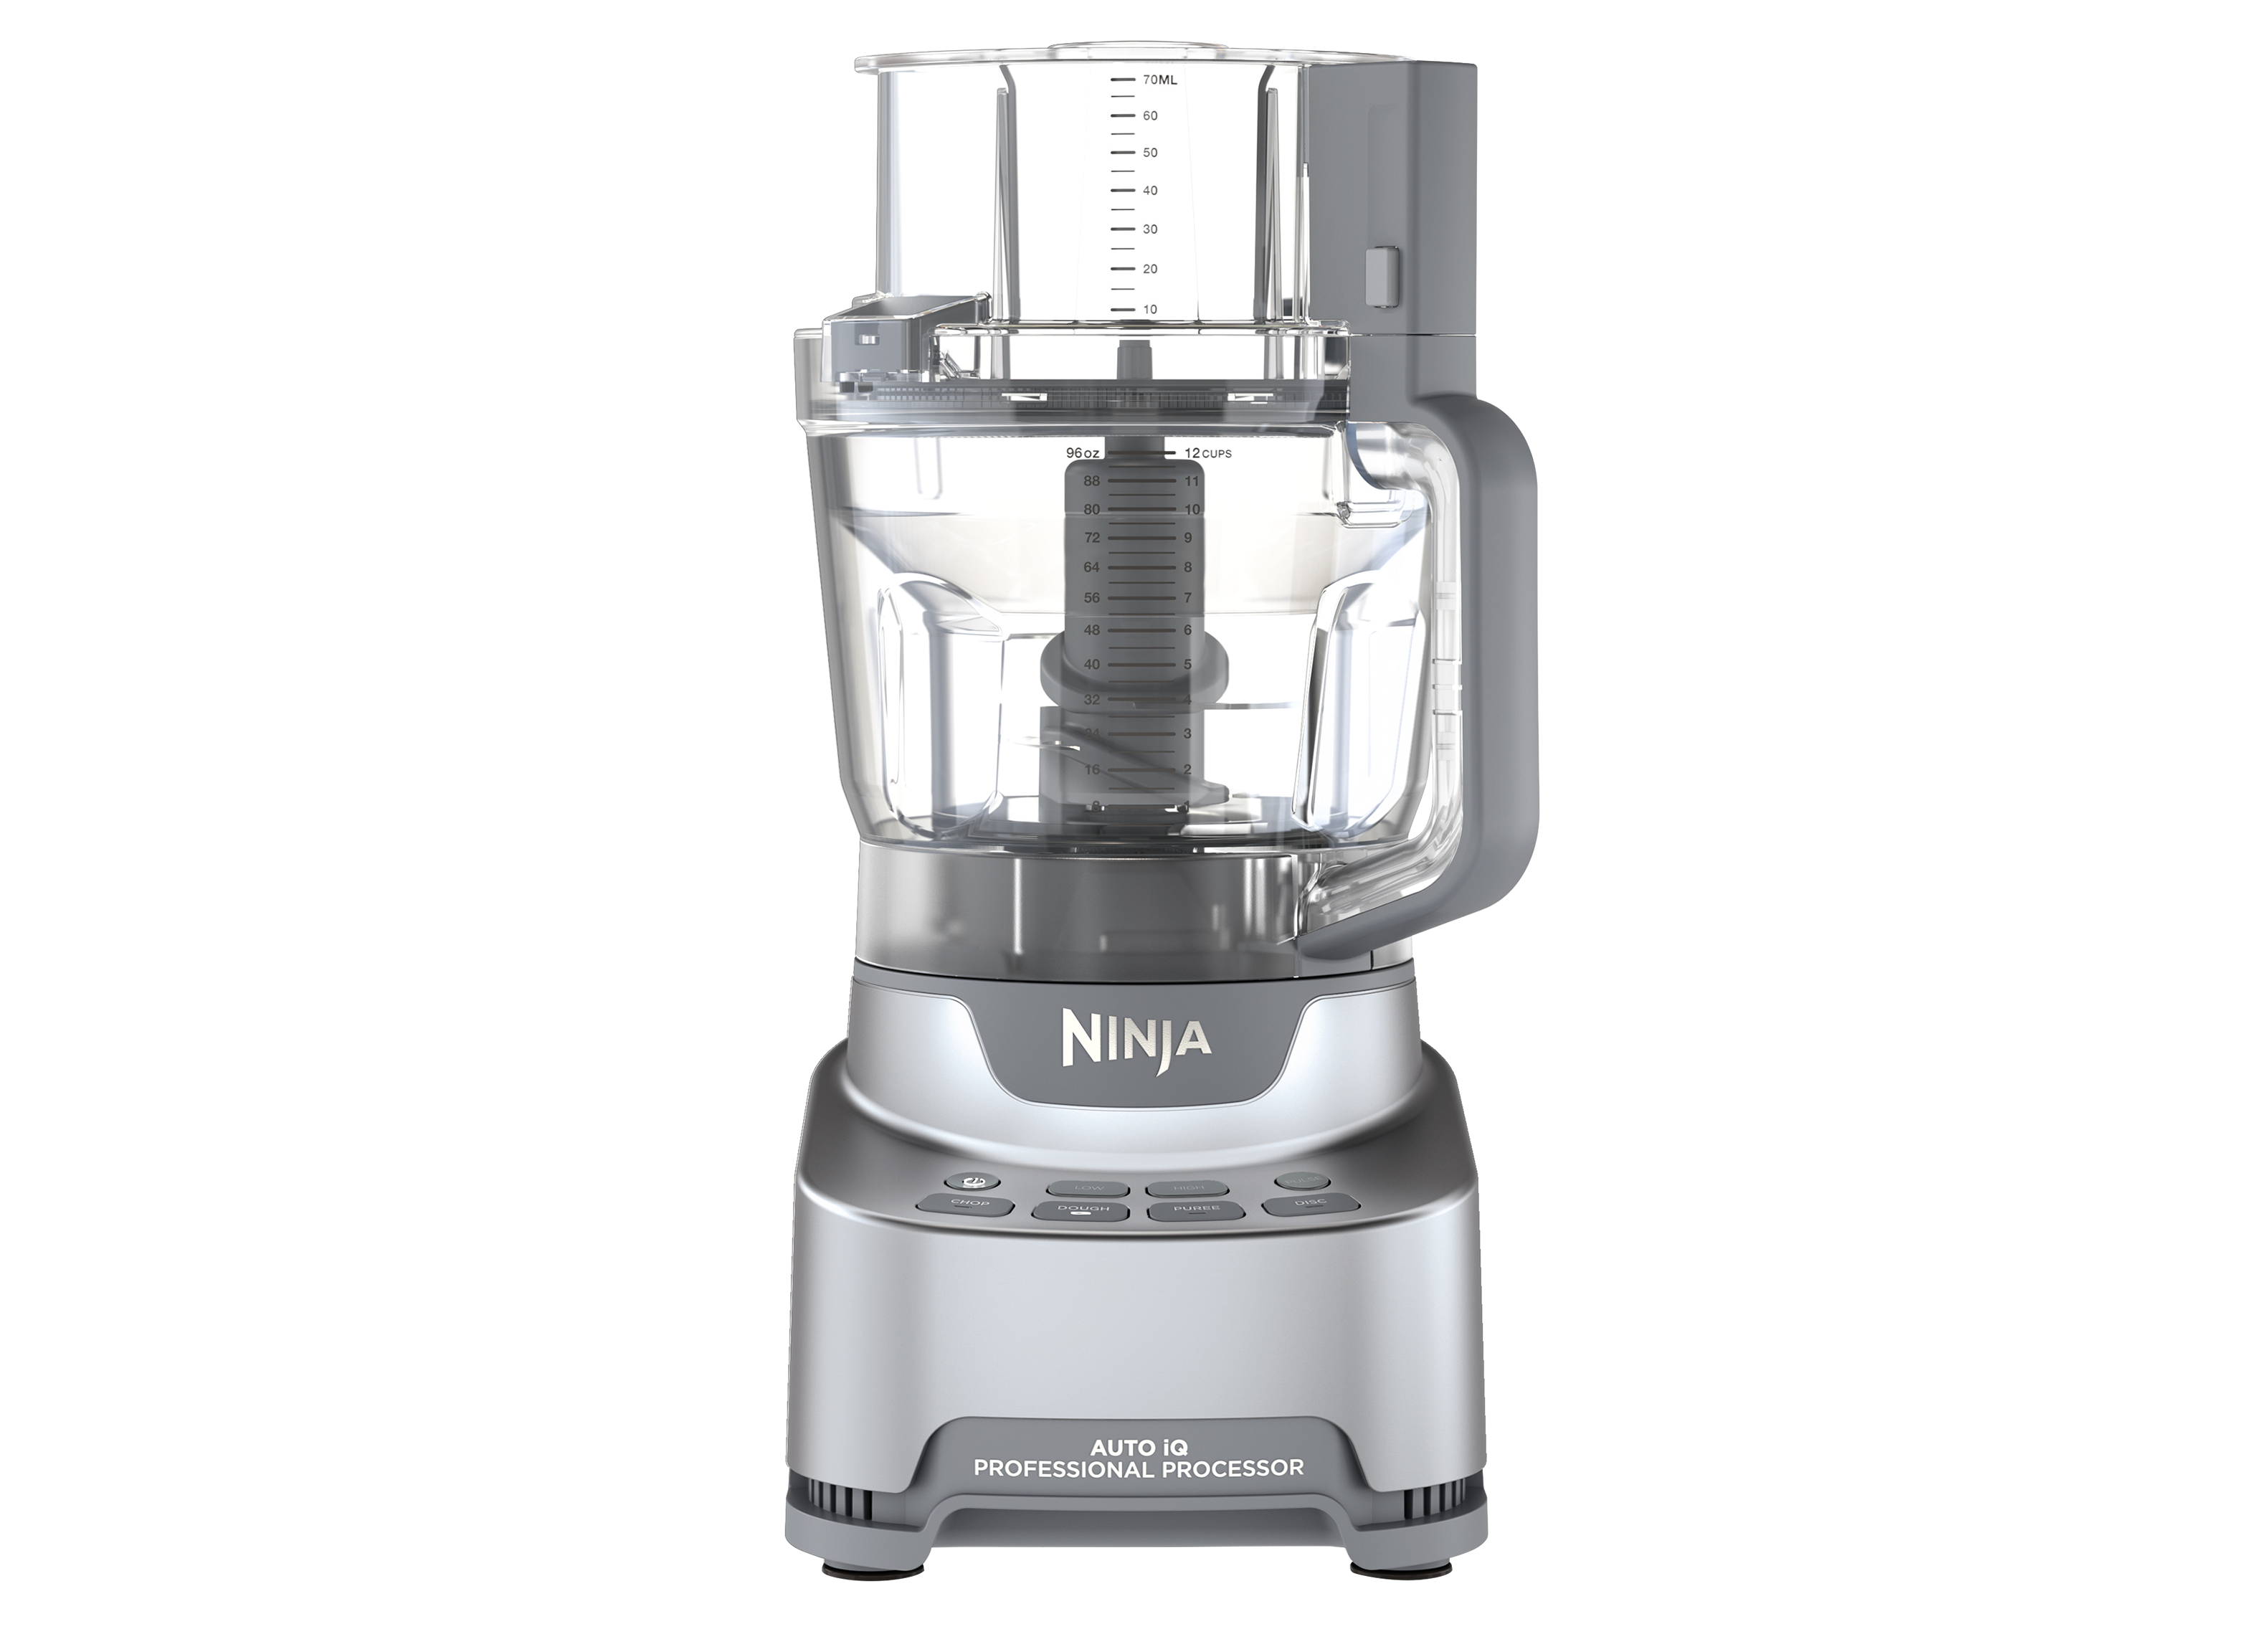 Review of the Ninja Professional Food Processor. BEFORE YOU BUY